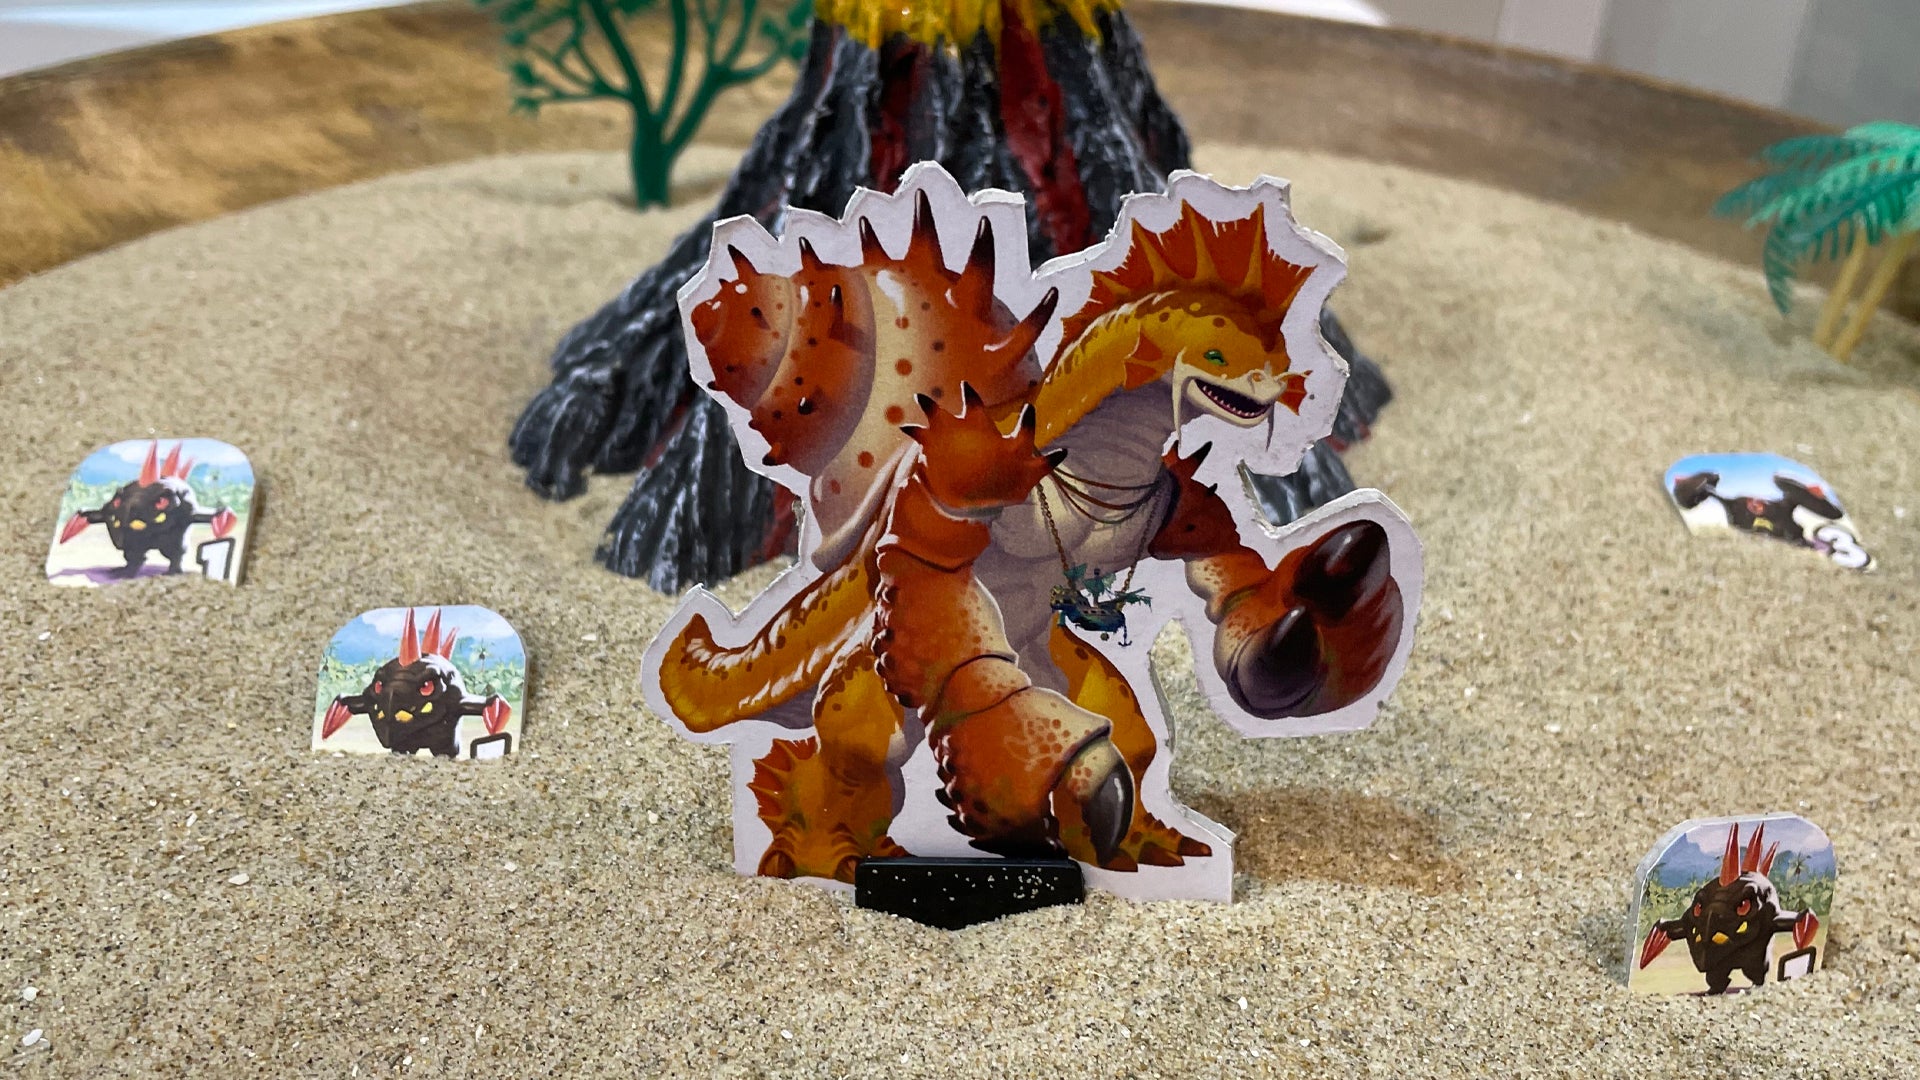 Image for Next King of Tokyo entry is a co-op board game called Monster Island